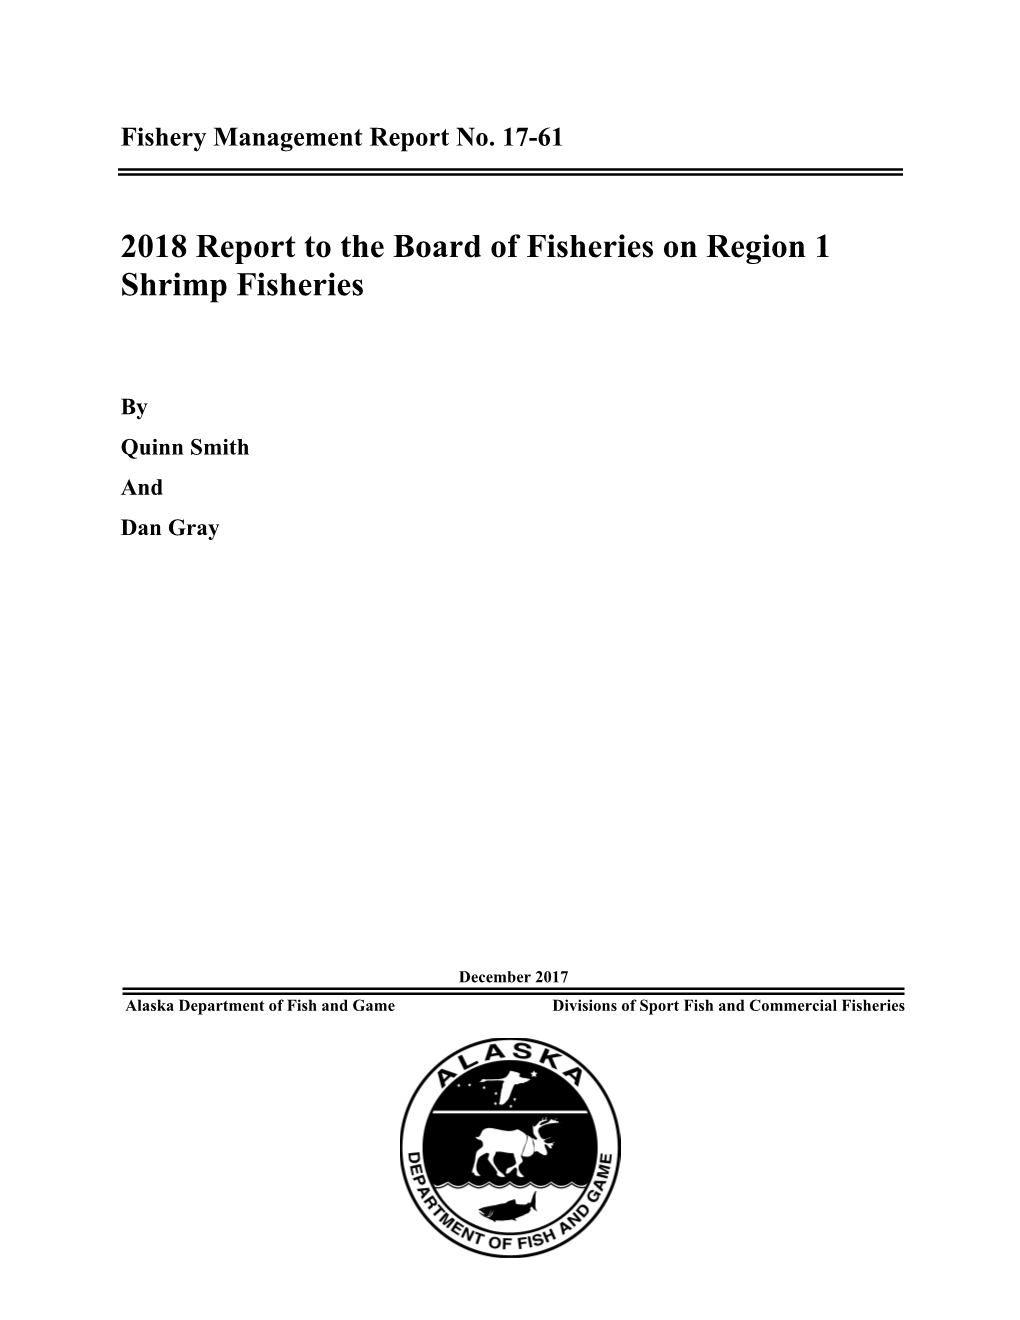 2018 Report to the Board of Fisheries on Region 1 Shrimp Fisheries